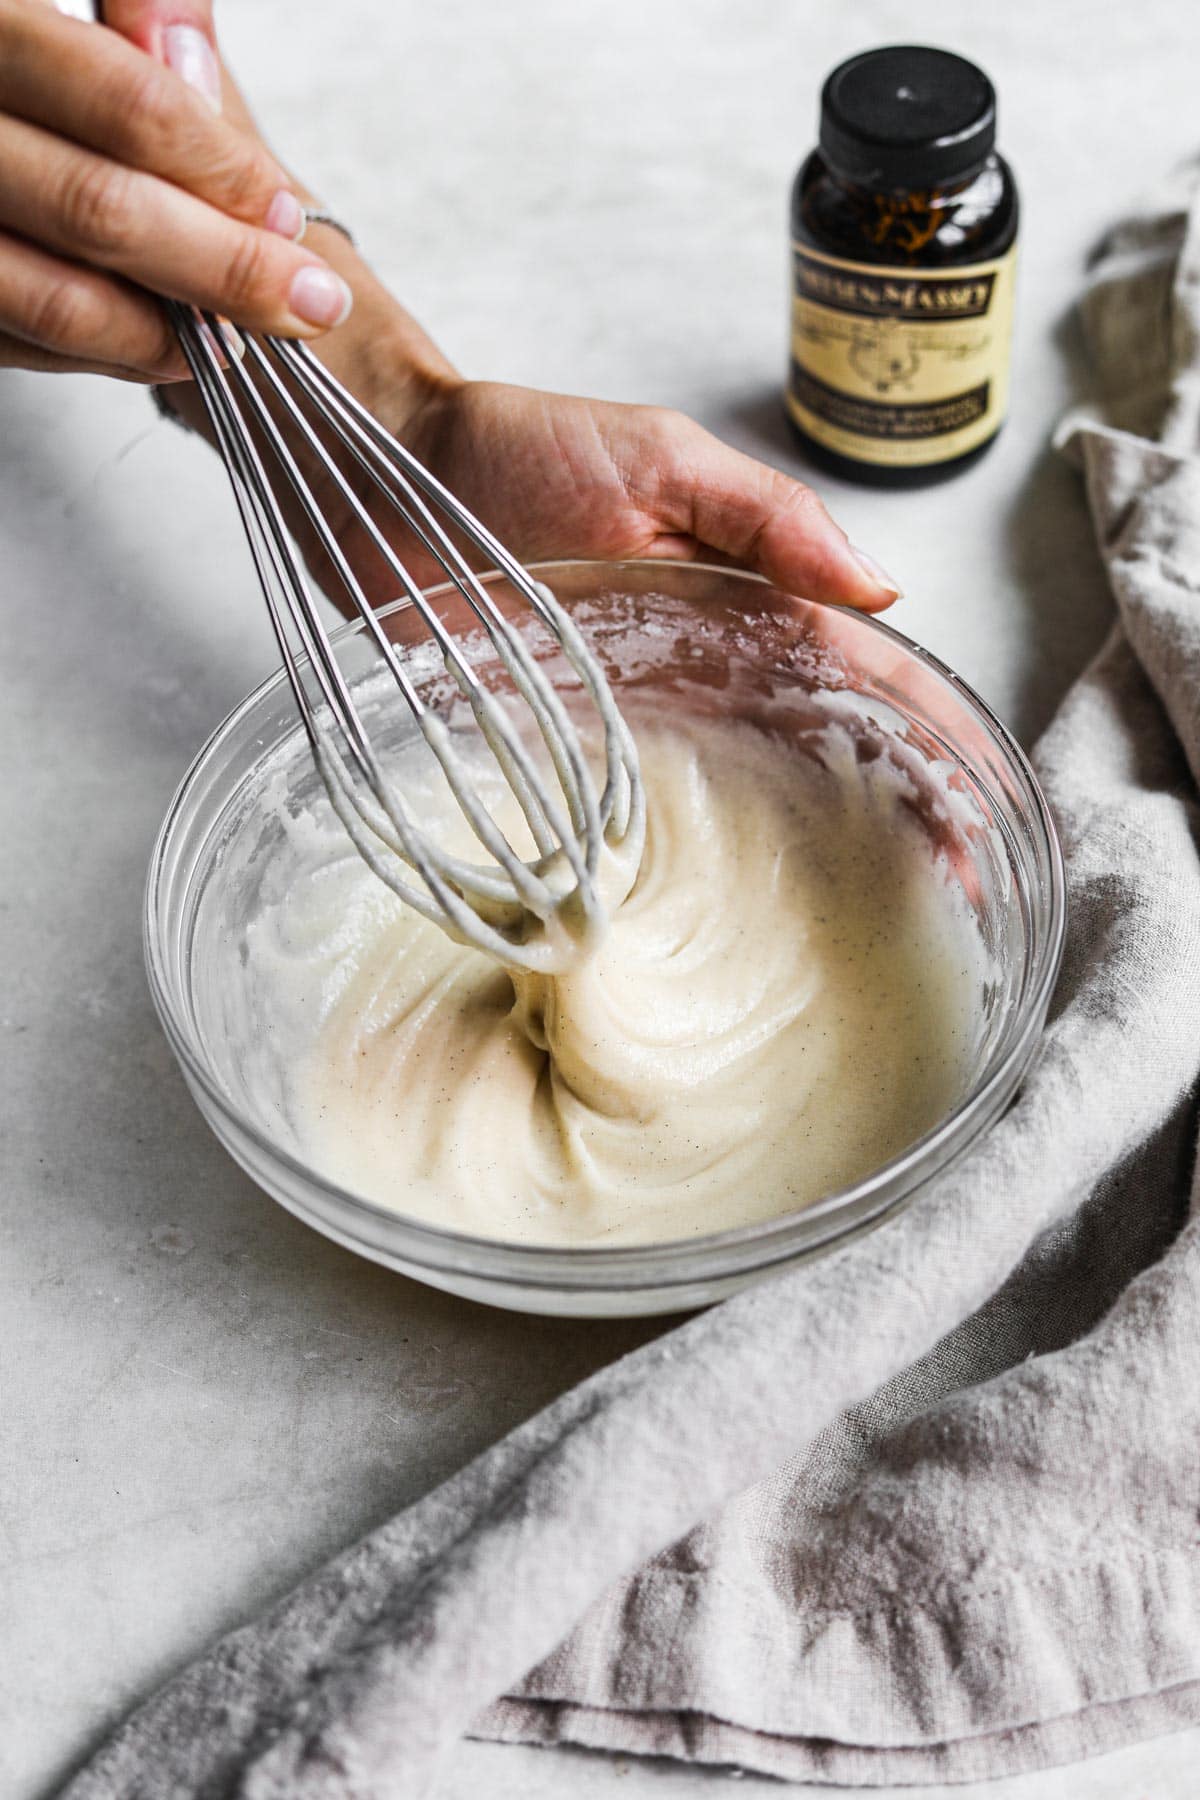 Hand whisking easy vanilla bean icing for muffins, cakes, cinnamon rolls, scones, and more.